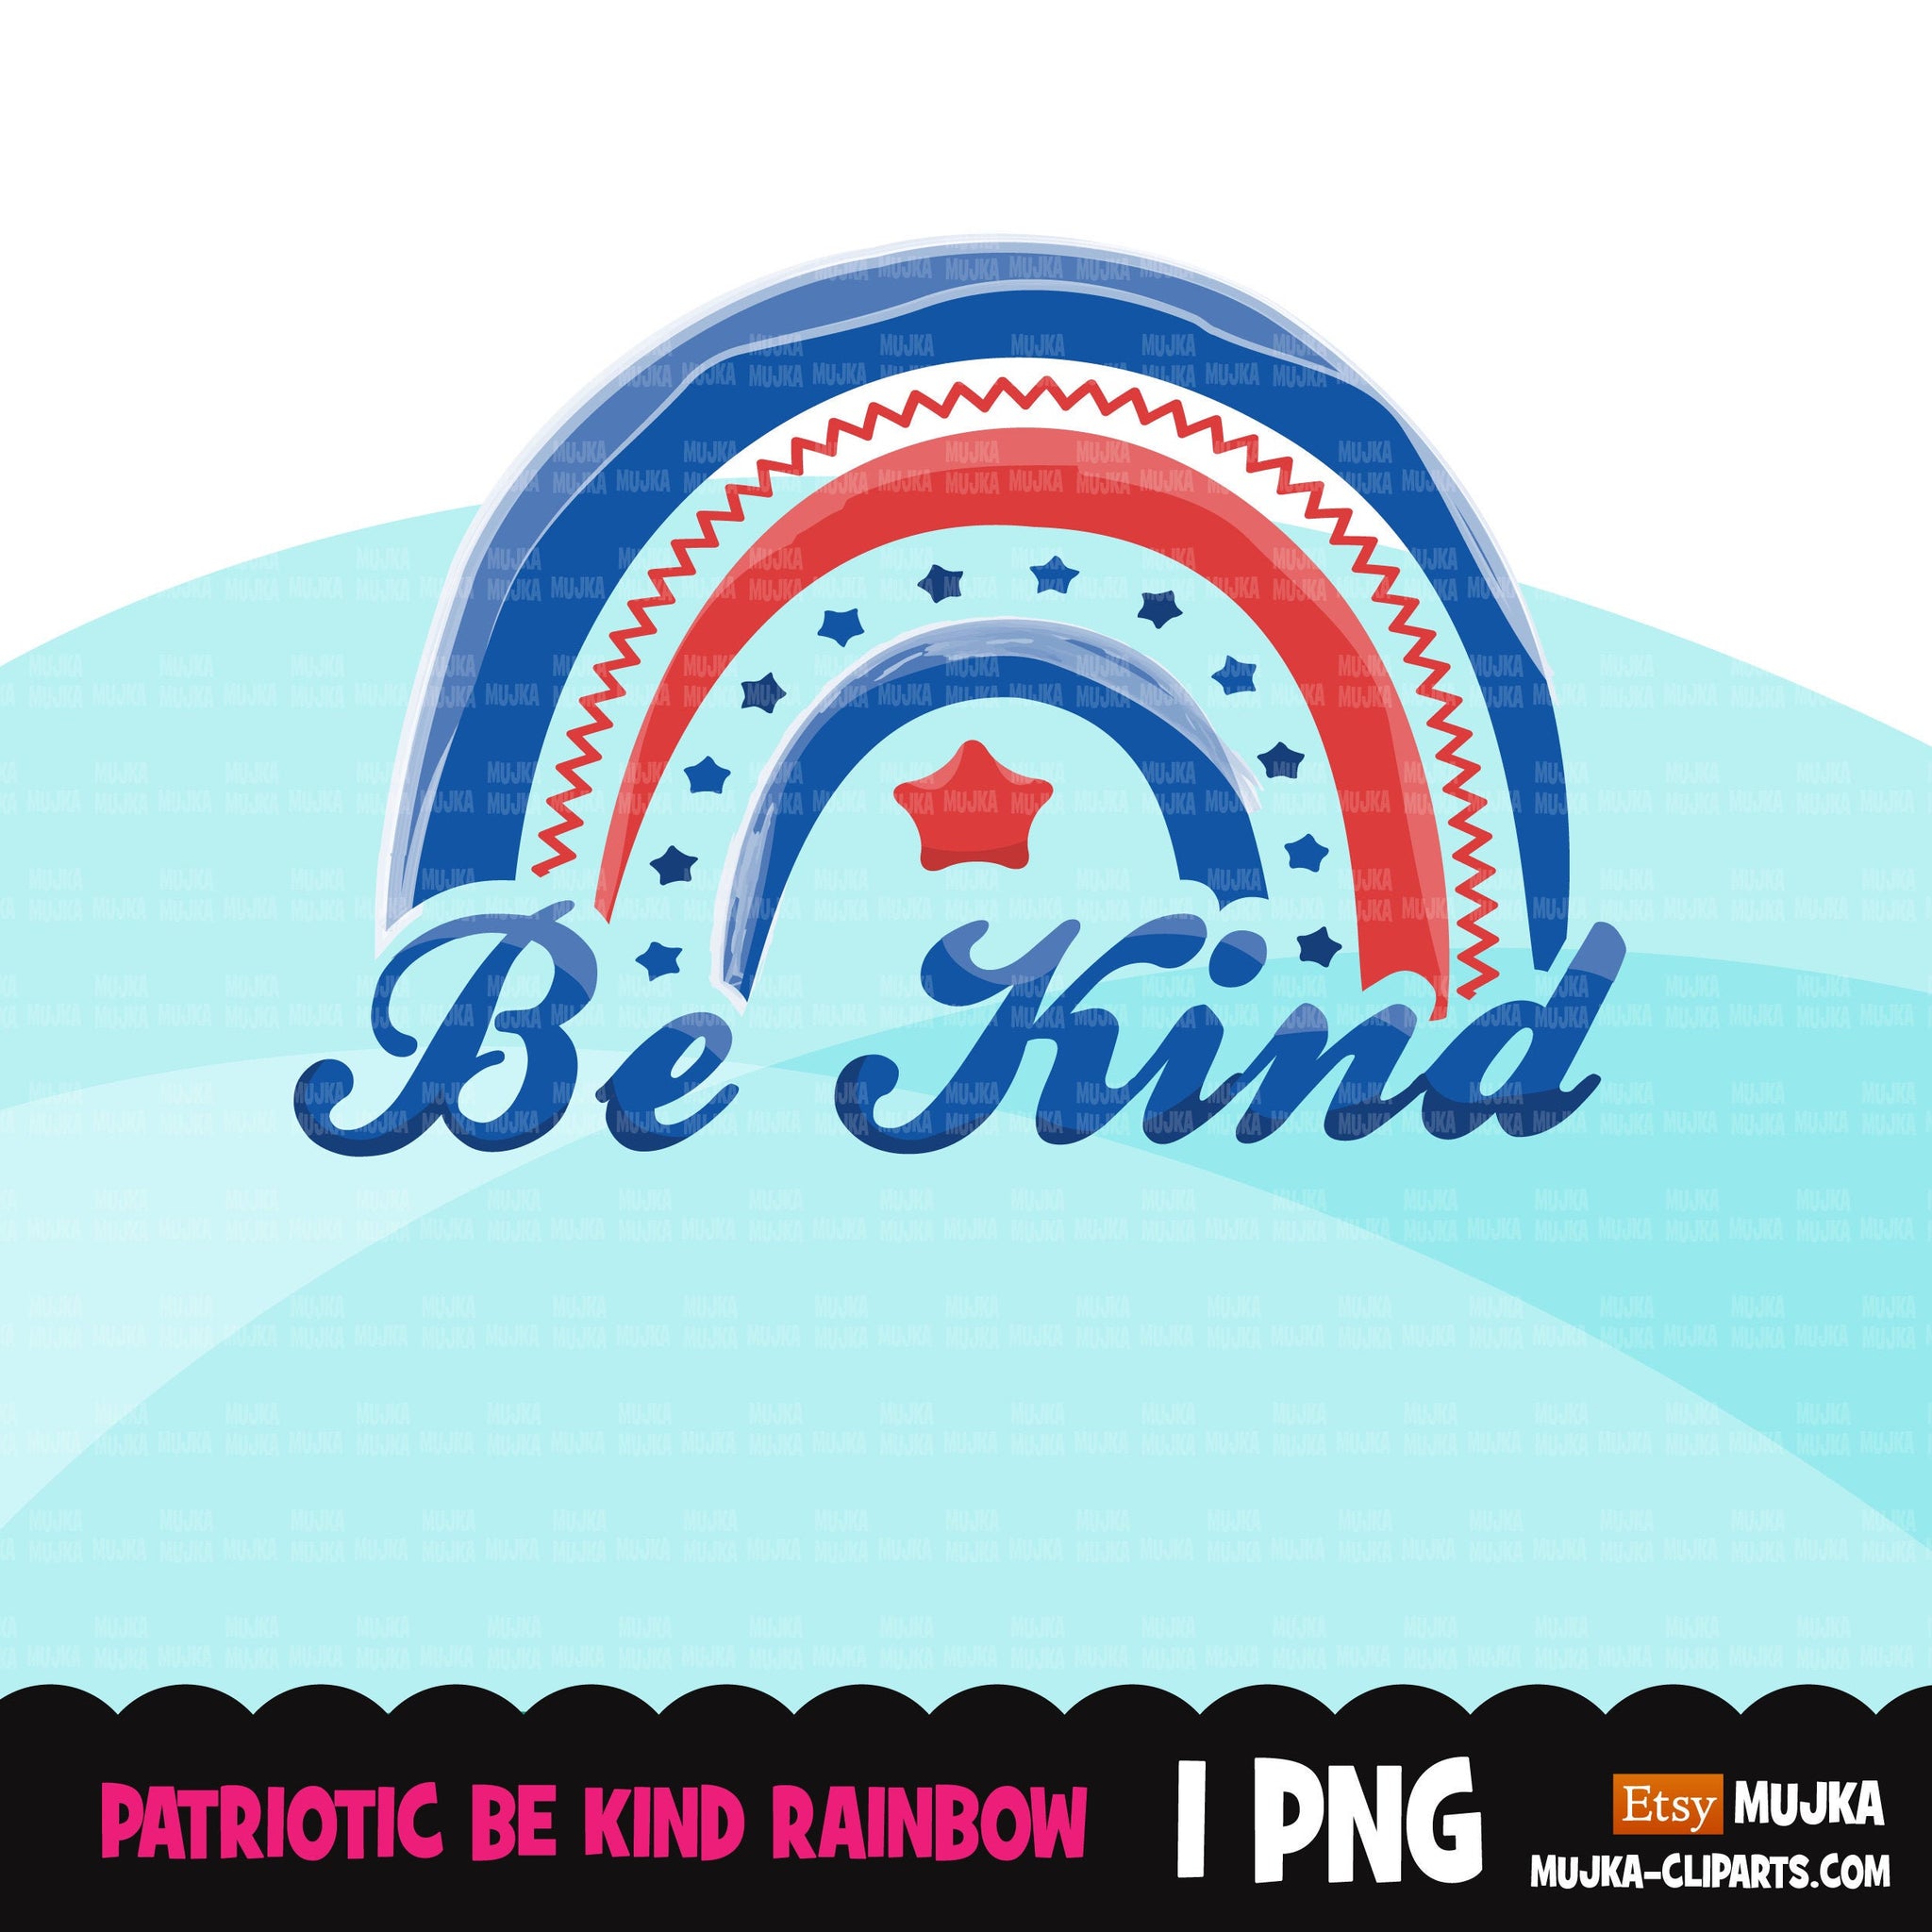 4th of July rainbow clipart, Be Kind Patriotic sublimation designs download, patriotic rainbow png, rainbow graphics, American flag PNG